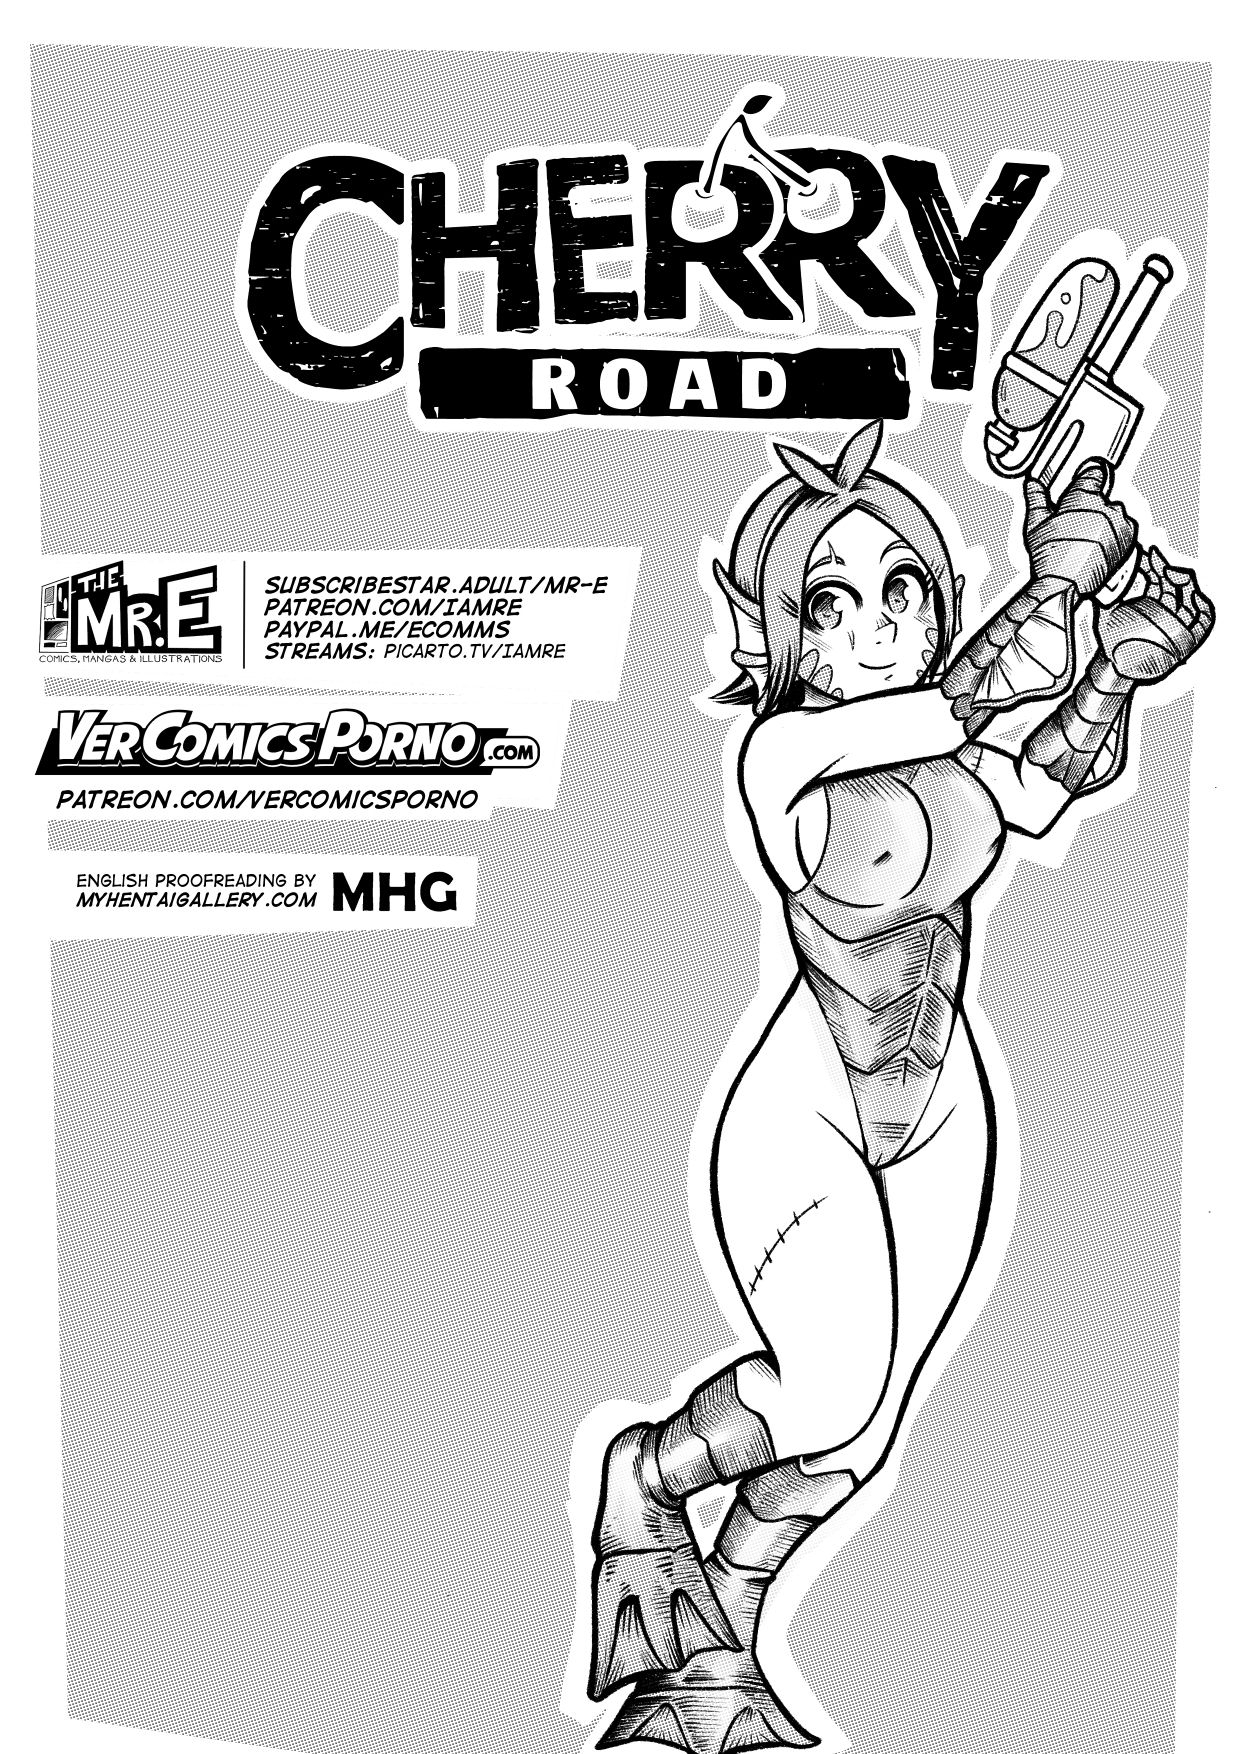 [Mr.E] Cherry Road Part 3: Shopping With A Zombie 32